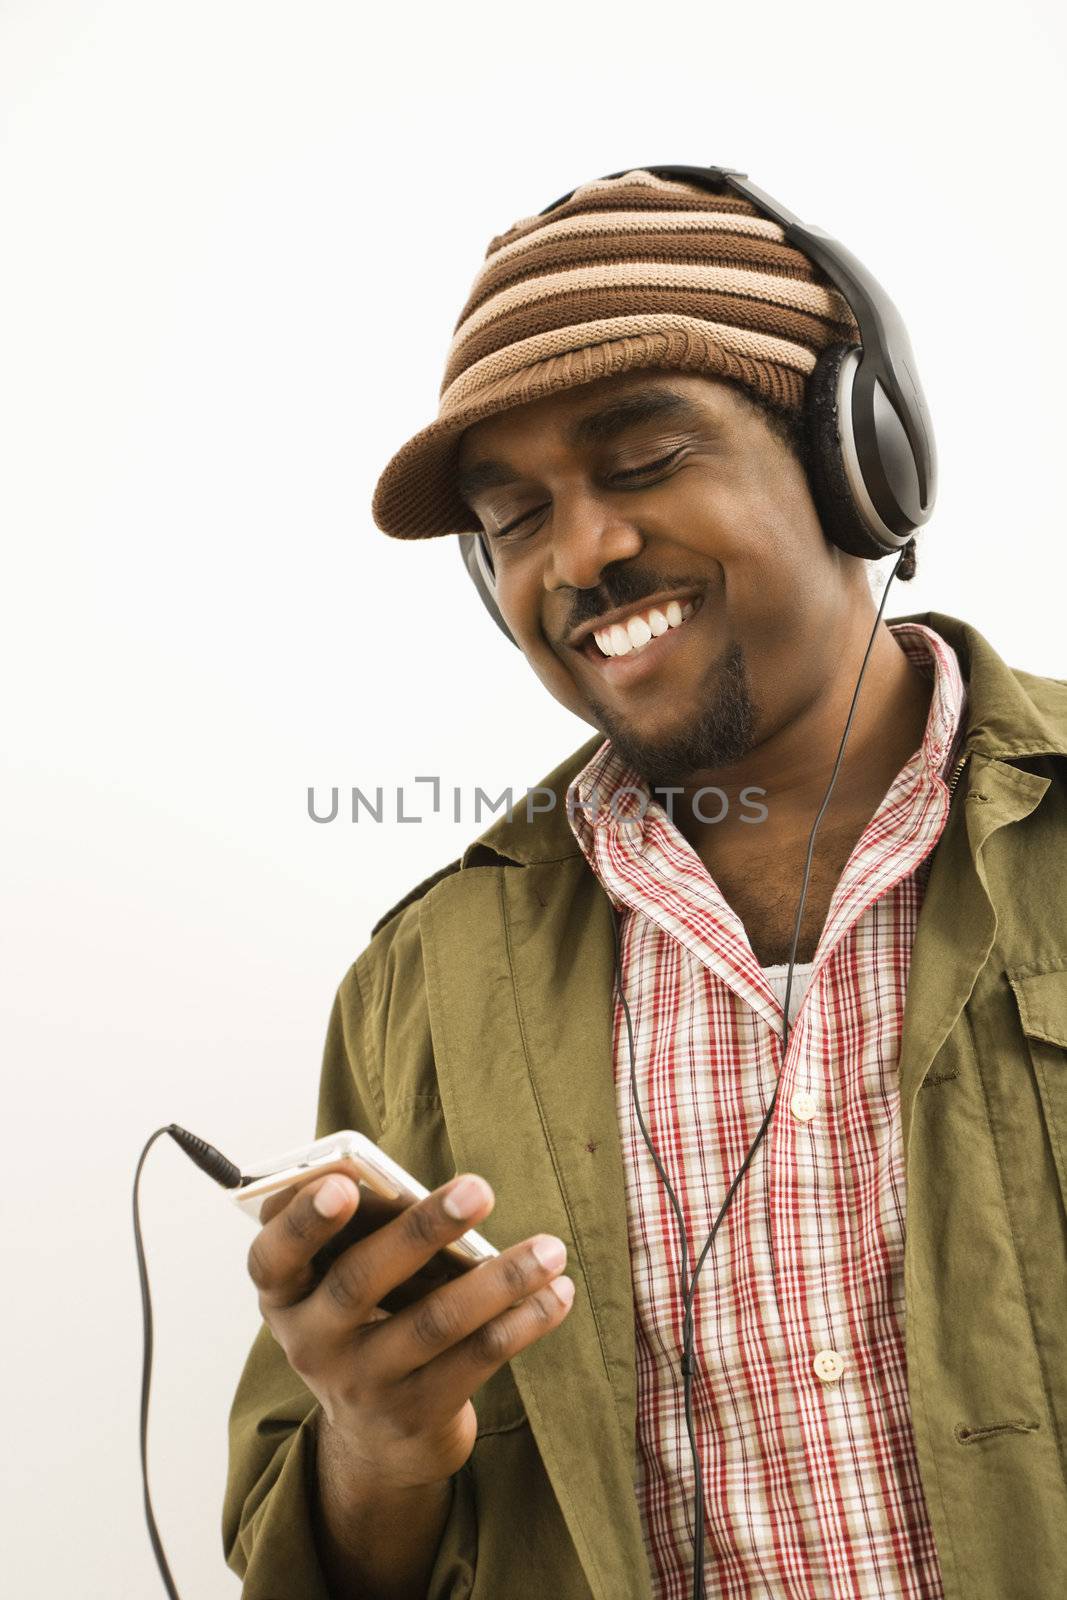 African-American mid-adult man wearing knit hat and listening to headphones and mp3 player.